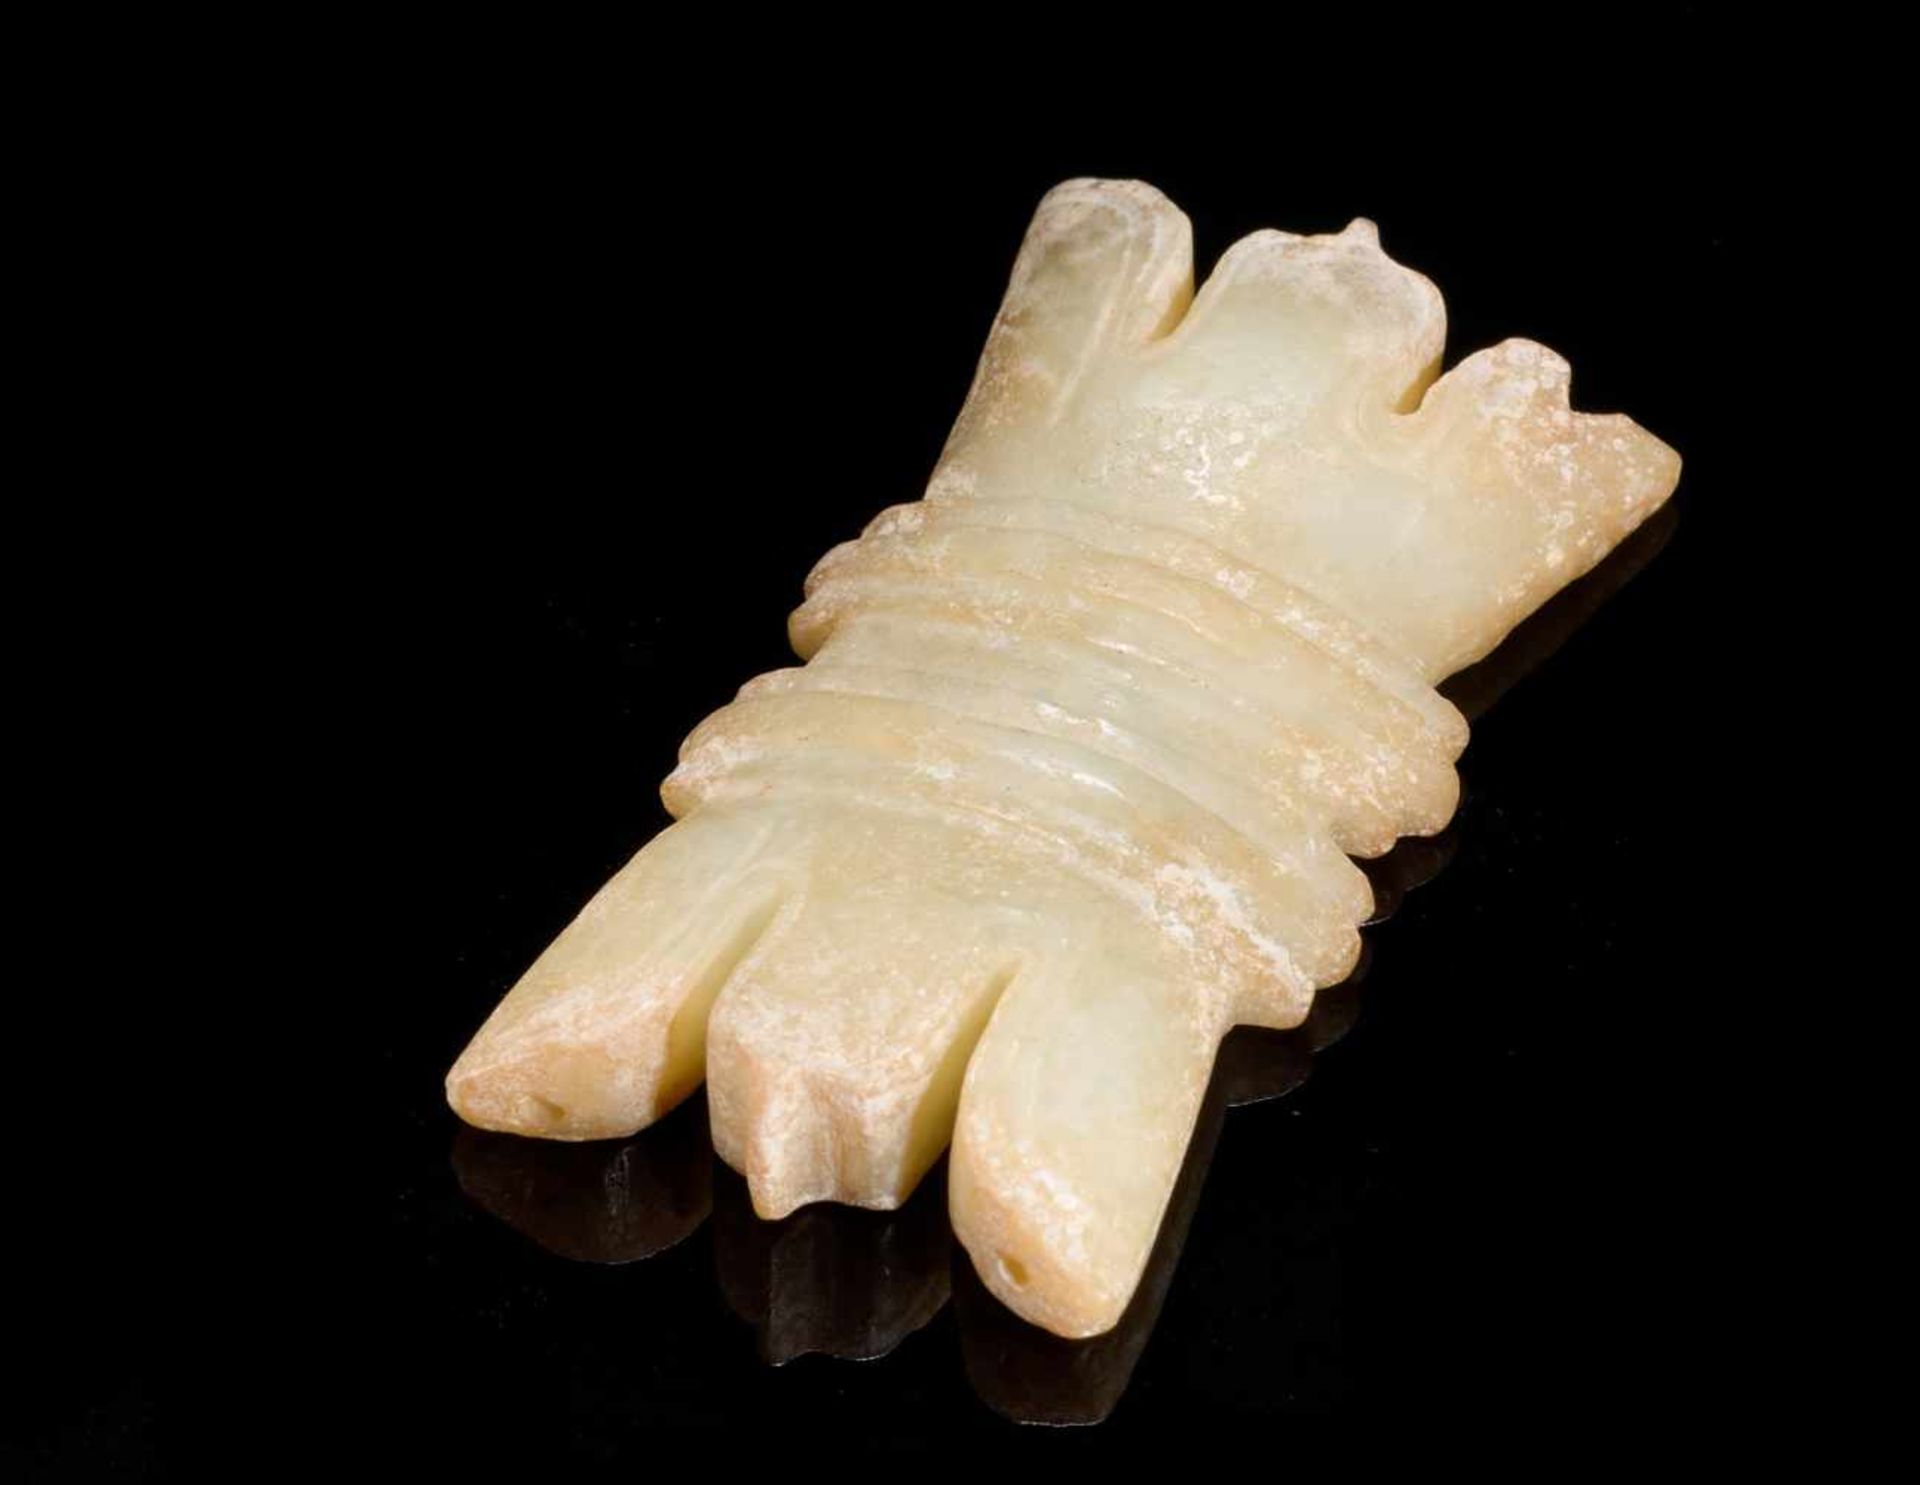 AN INTRIGUING SMALL JADE ORNAMENT SHAPED AS A “TIED BUNDLE” (SHUJUAN) Jade. China, Late Western - Image 14 of 14